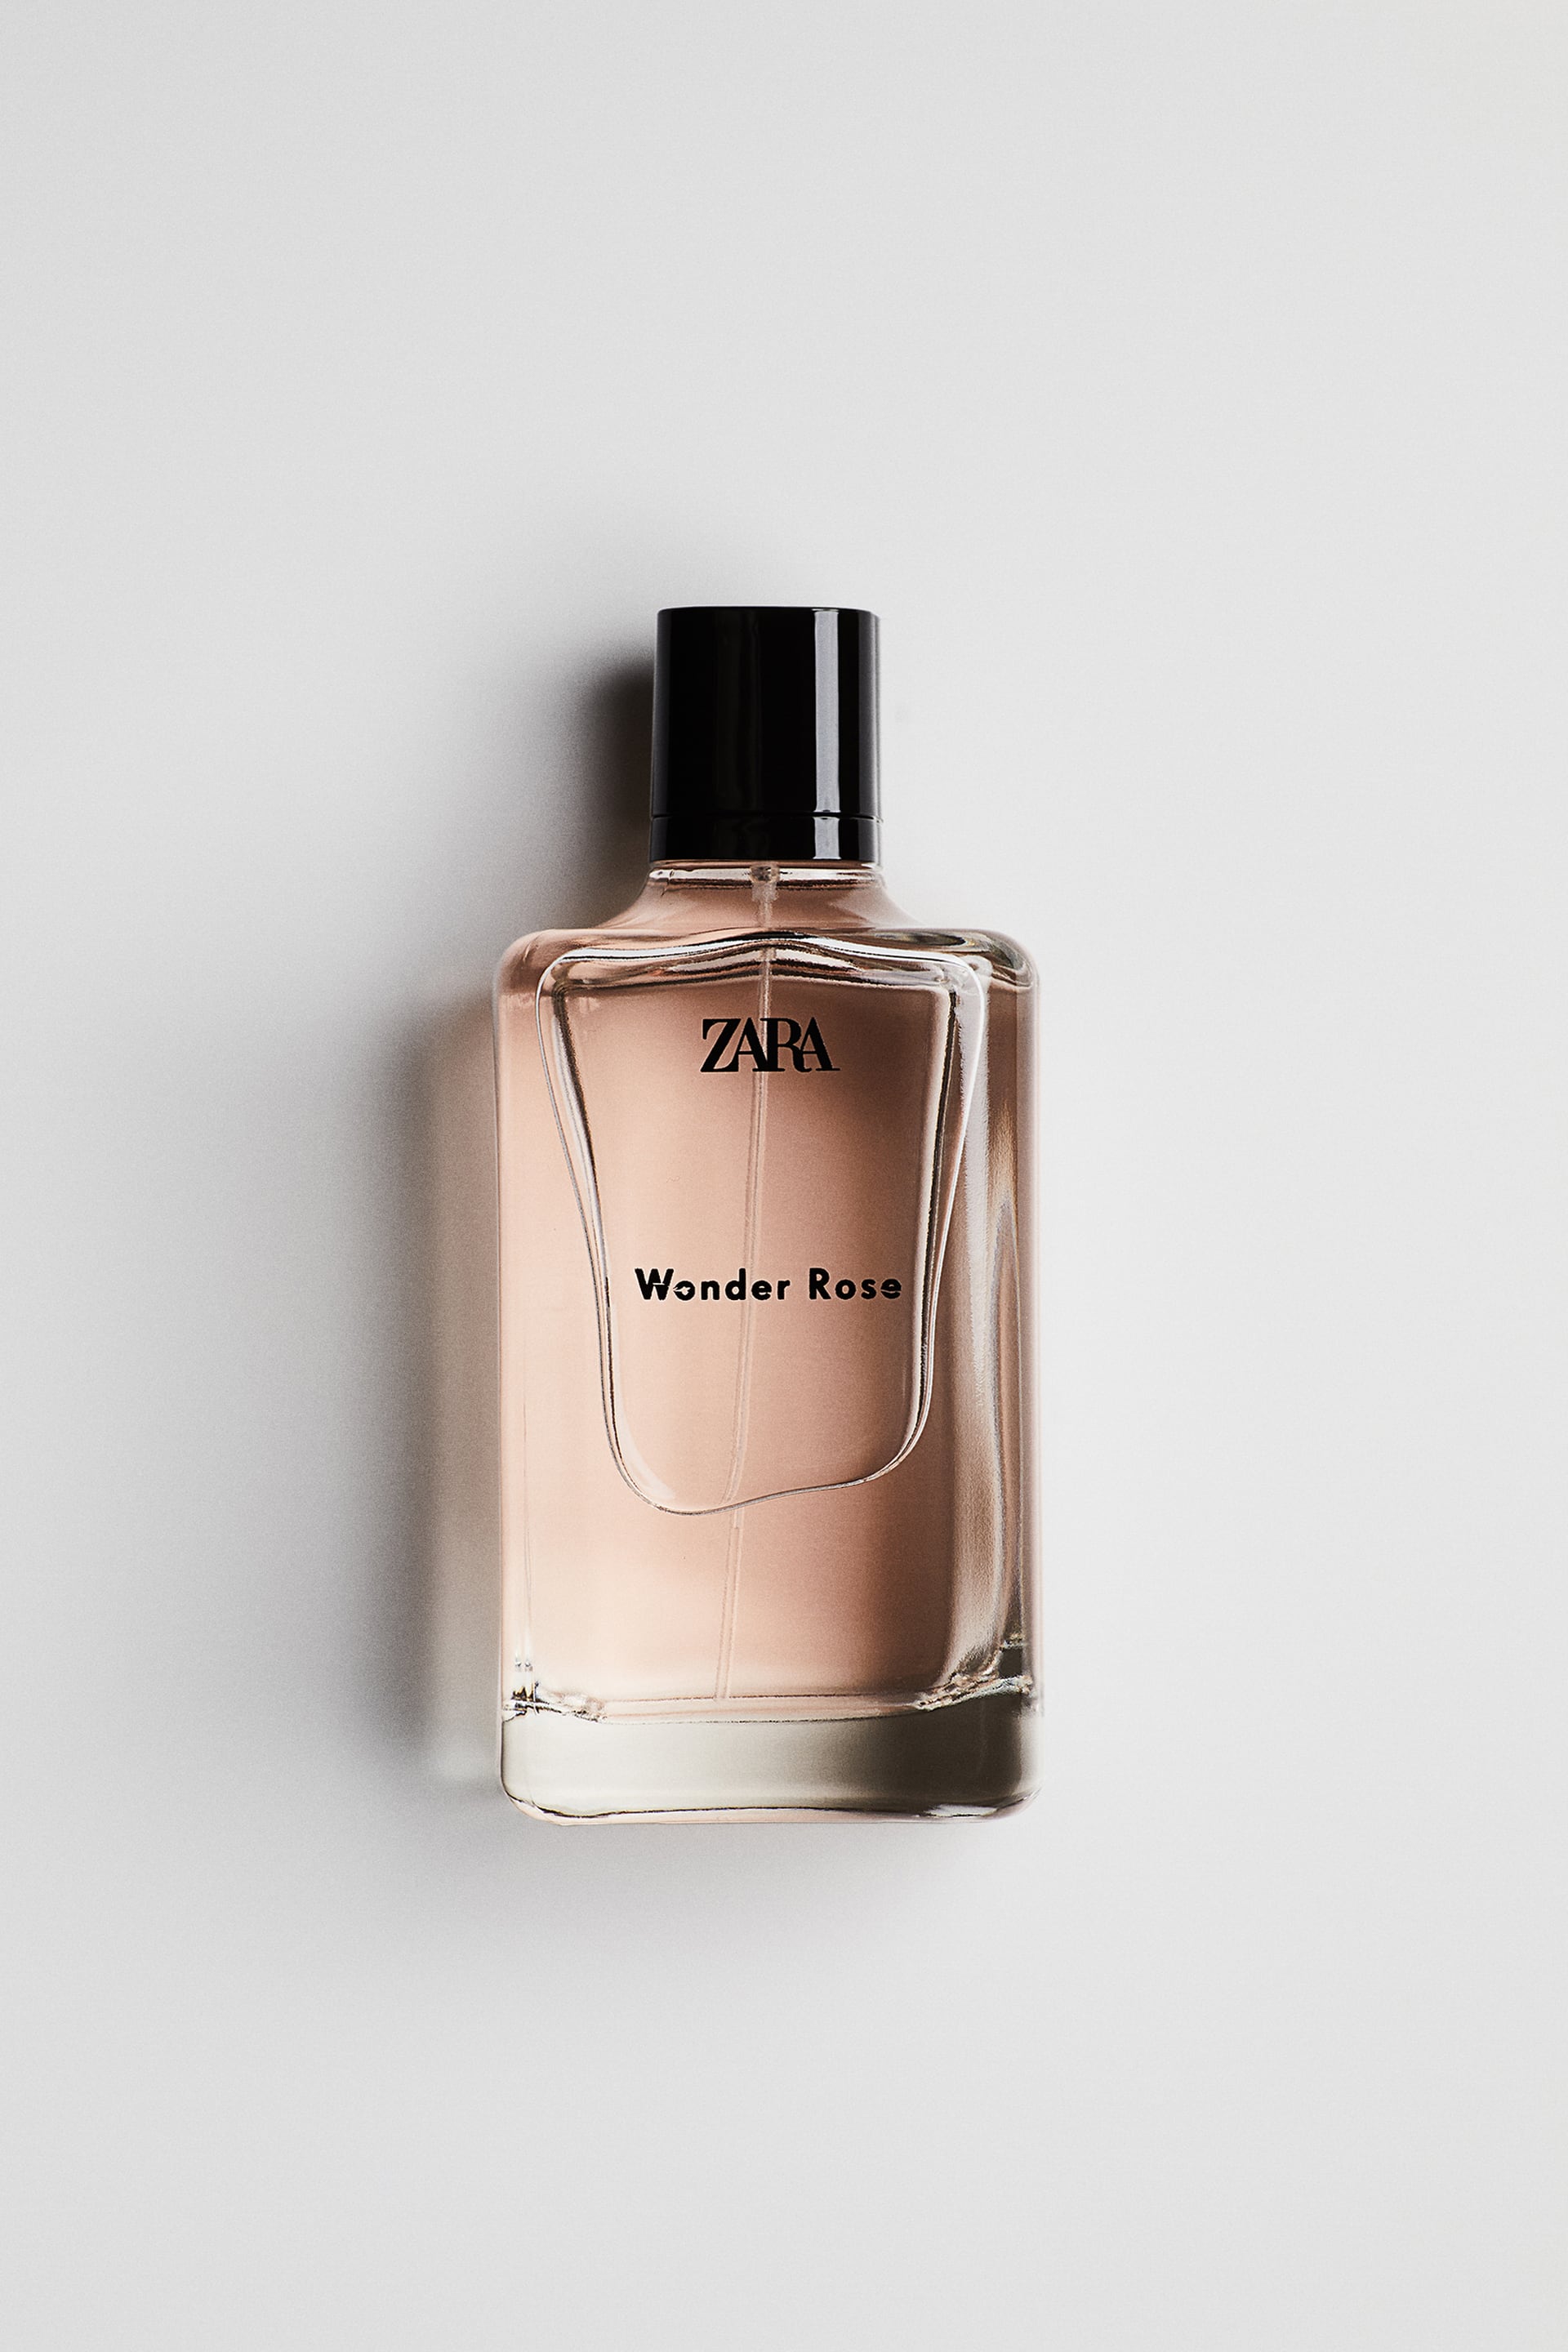 13 Best Zara Perfumes That Should Be on Your Vanity